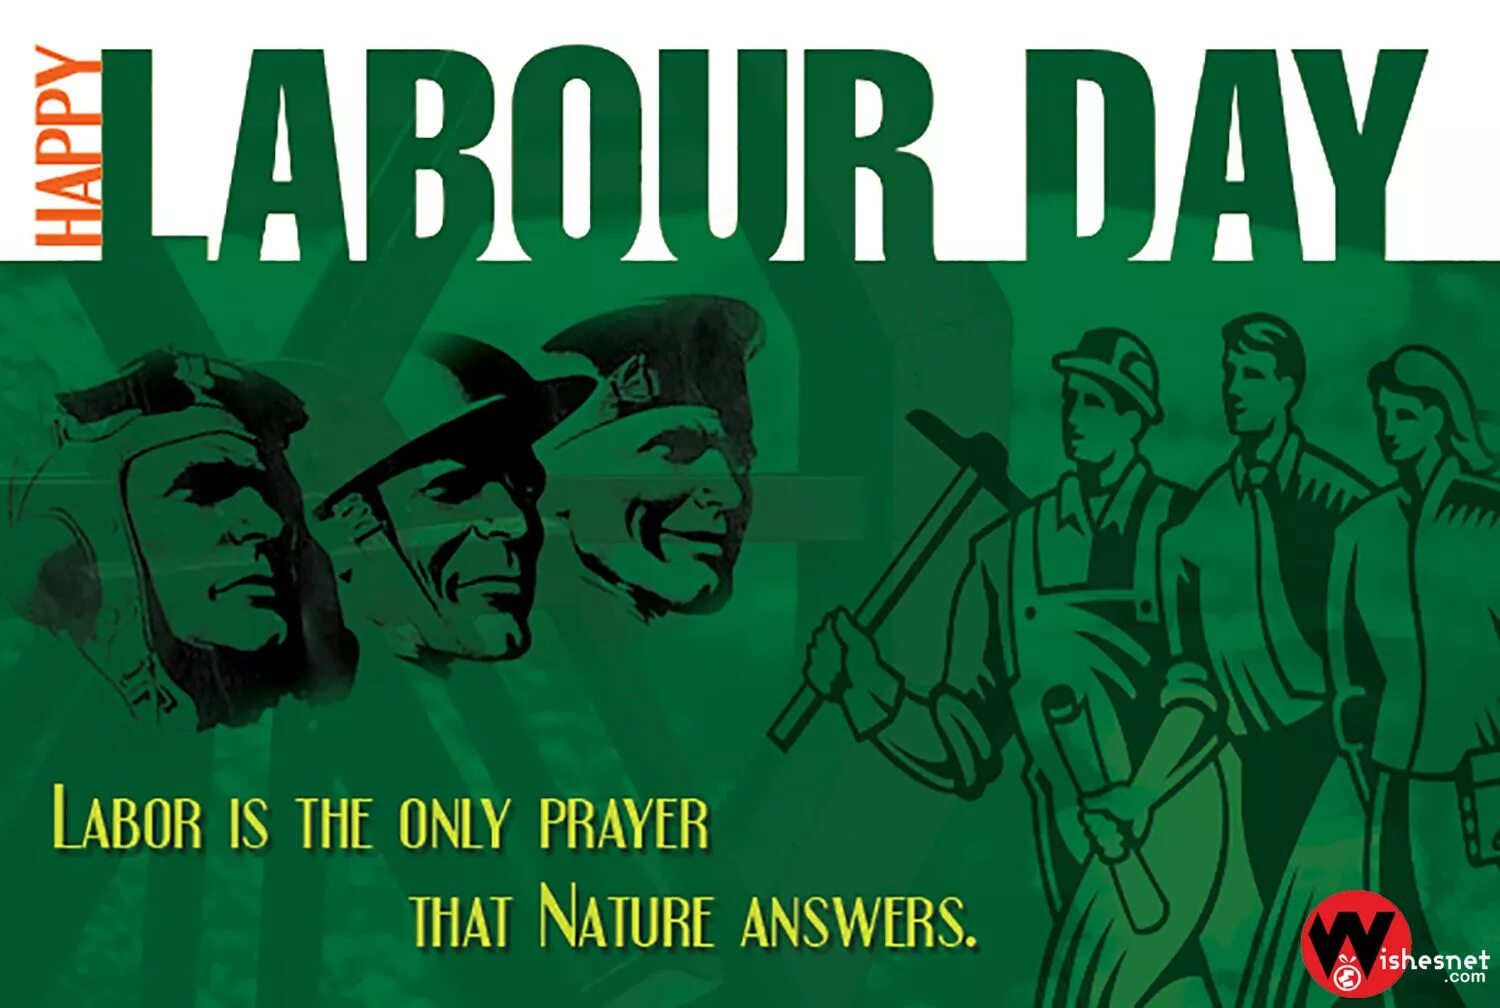 Make may day. Labour Day. День труда в США. Happy Labor Day 1 May. International Labour Day 1 May.